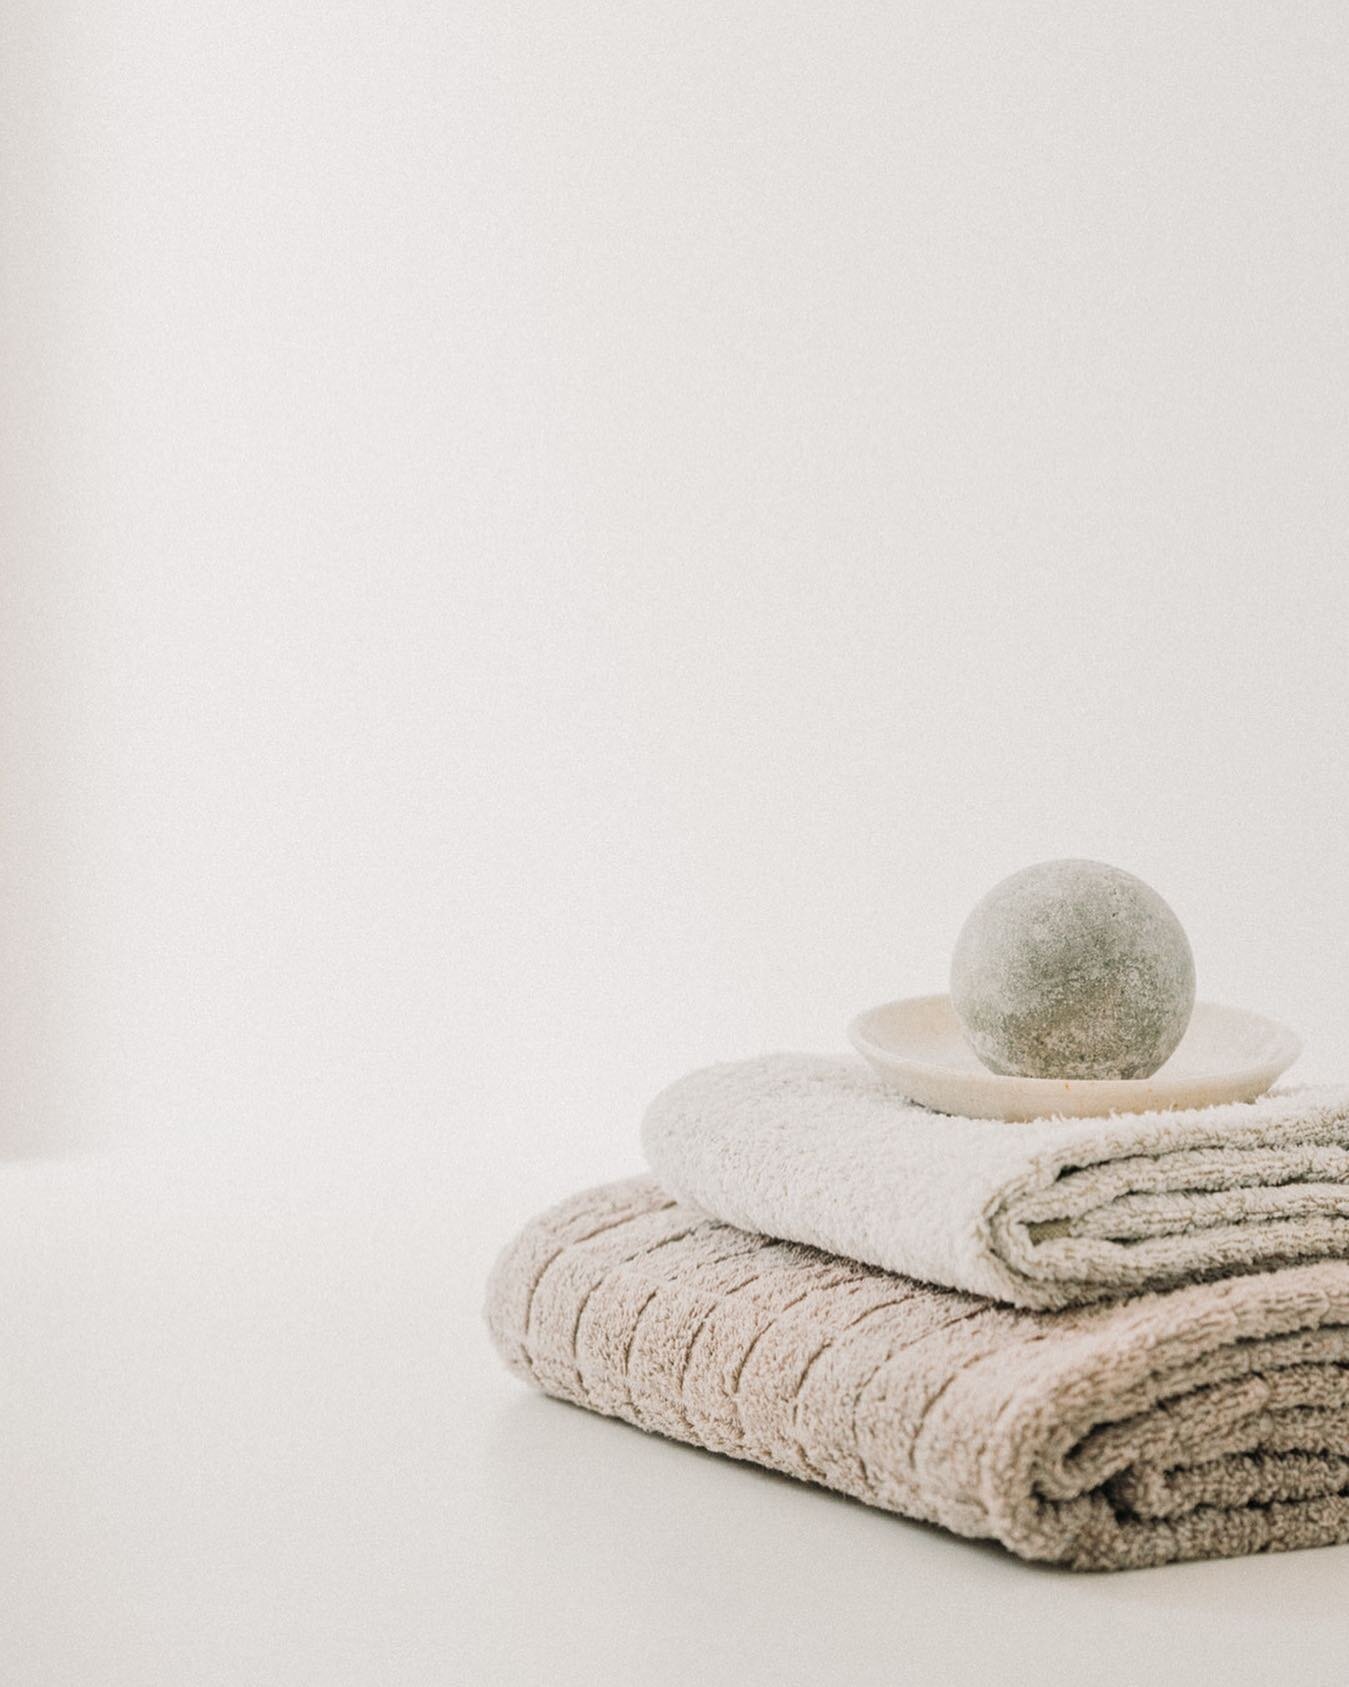 Perfect spherical soaps from Hetkinen make the best little treats for the kitchen or bathroom. Available in two gorgeous fragrances - Pine + Oatmeal and Crowberry + Spruce. Each one subtle yet fresh, made from natural Finnish ingredients 👌🏼 

_____